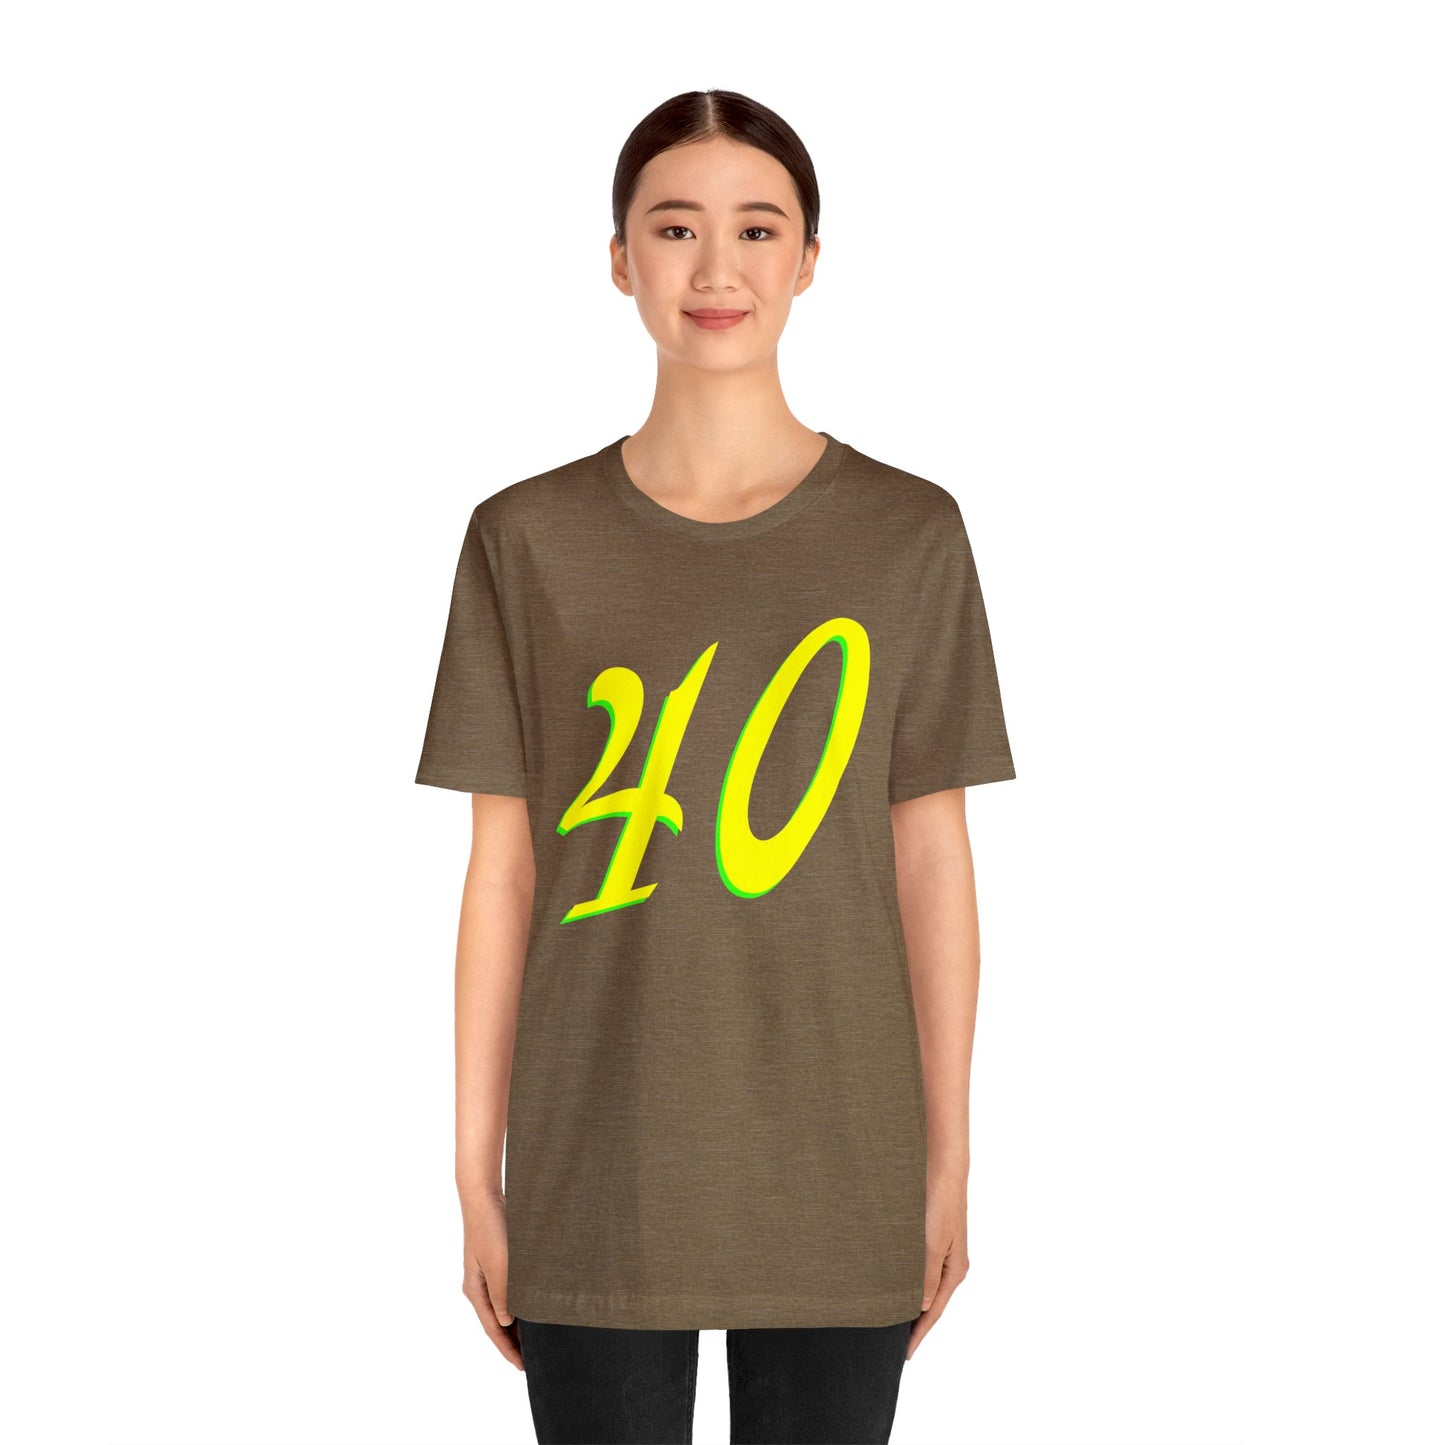 Number 40 Design - Soft Cotton Tee for birthdays and celebrations, Gift for friends and family, Multiple Options by clothezy.com in Dark Grey Heather Size Medium - Buy Now